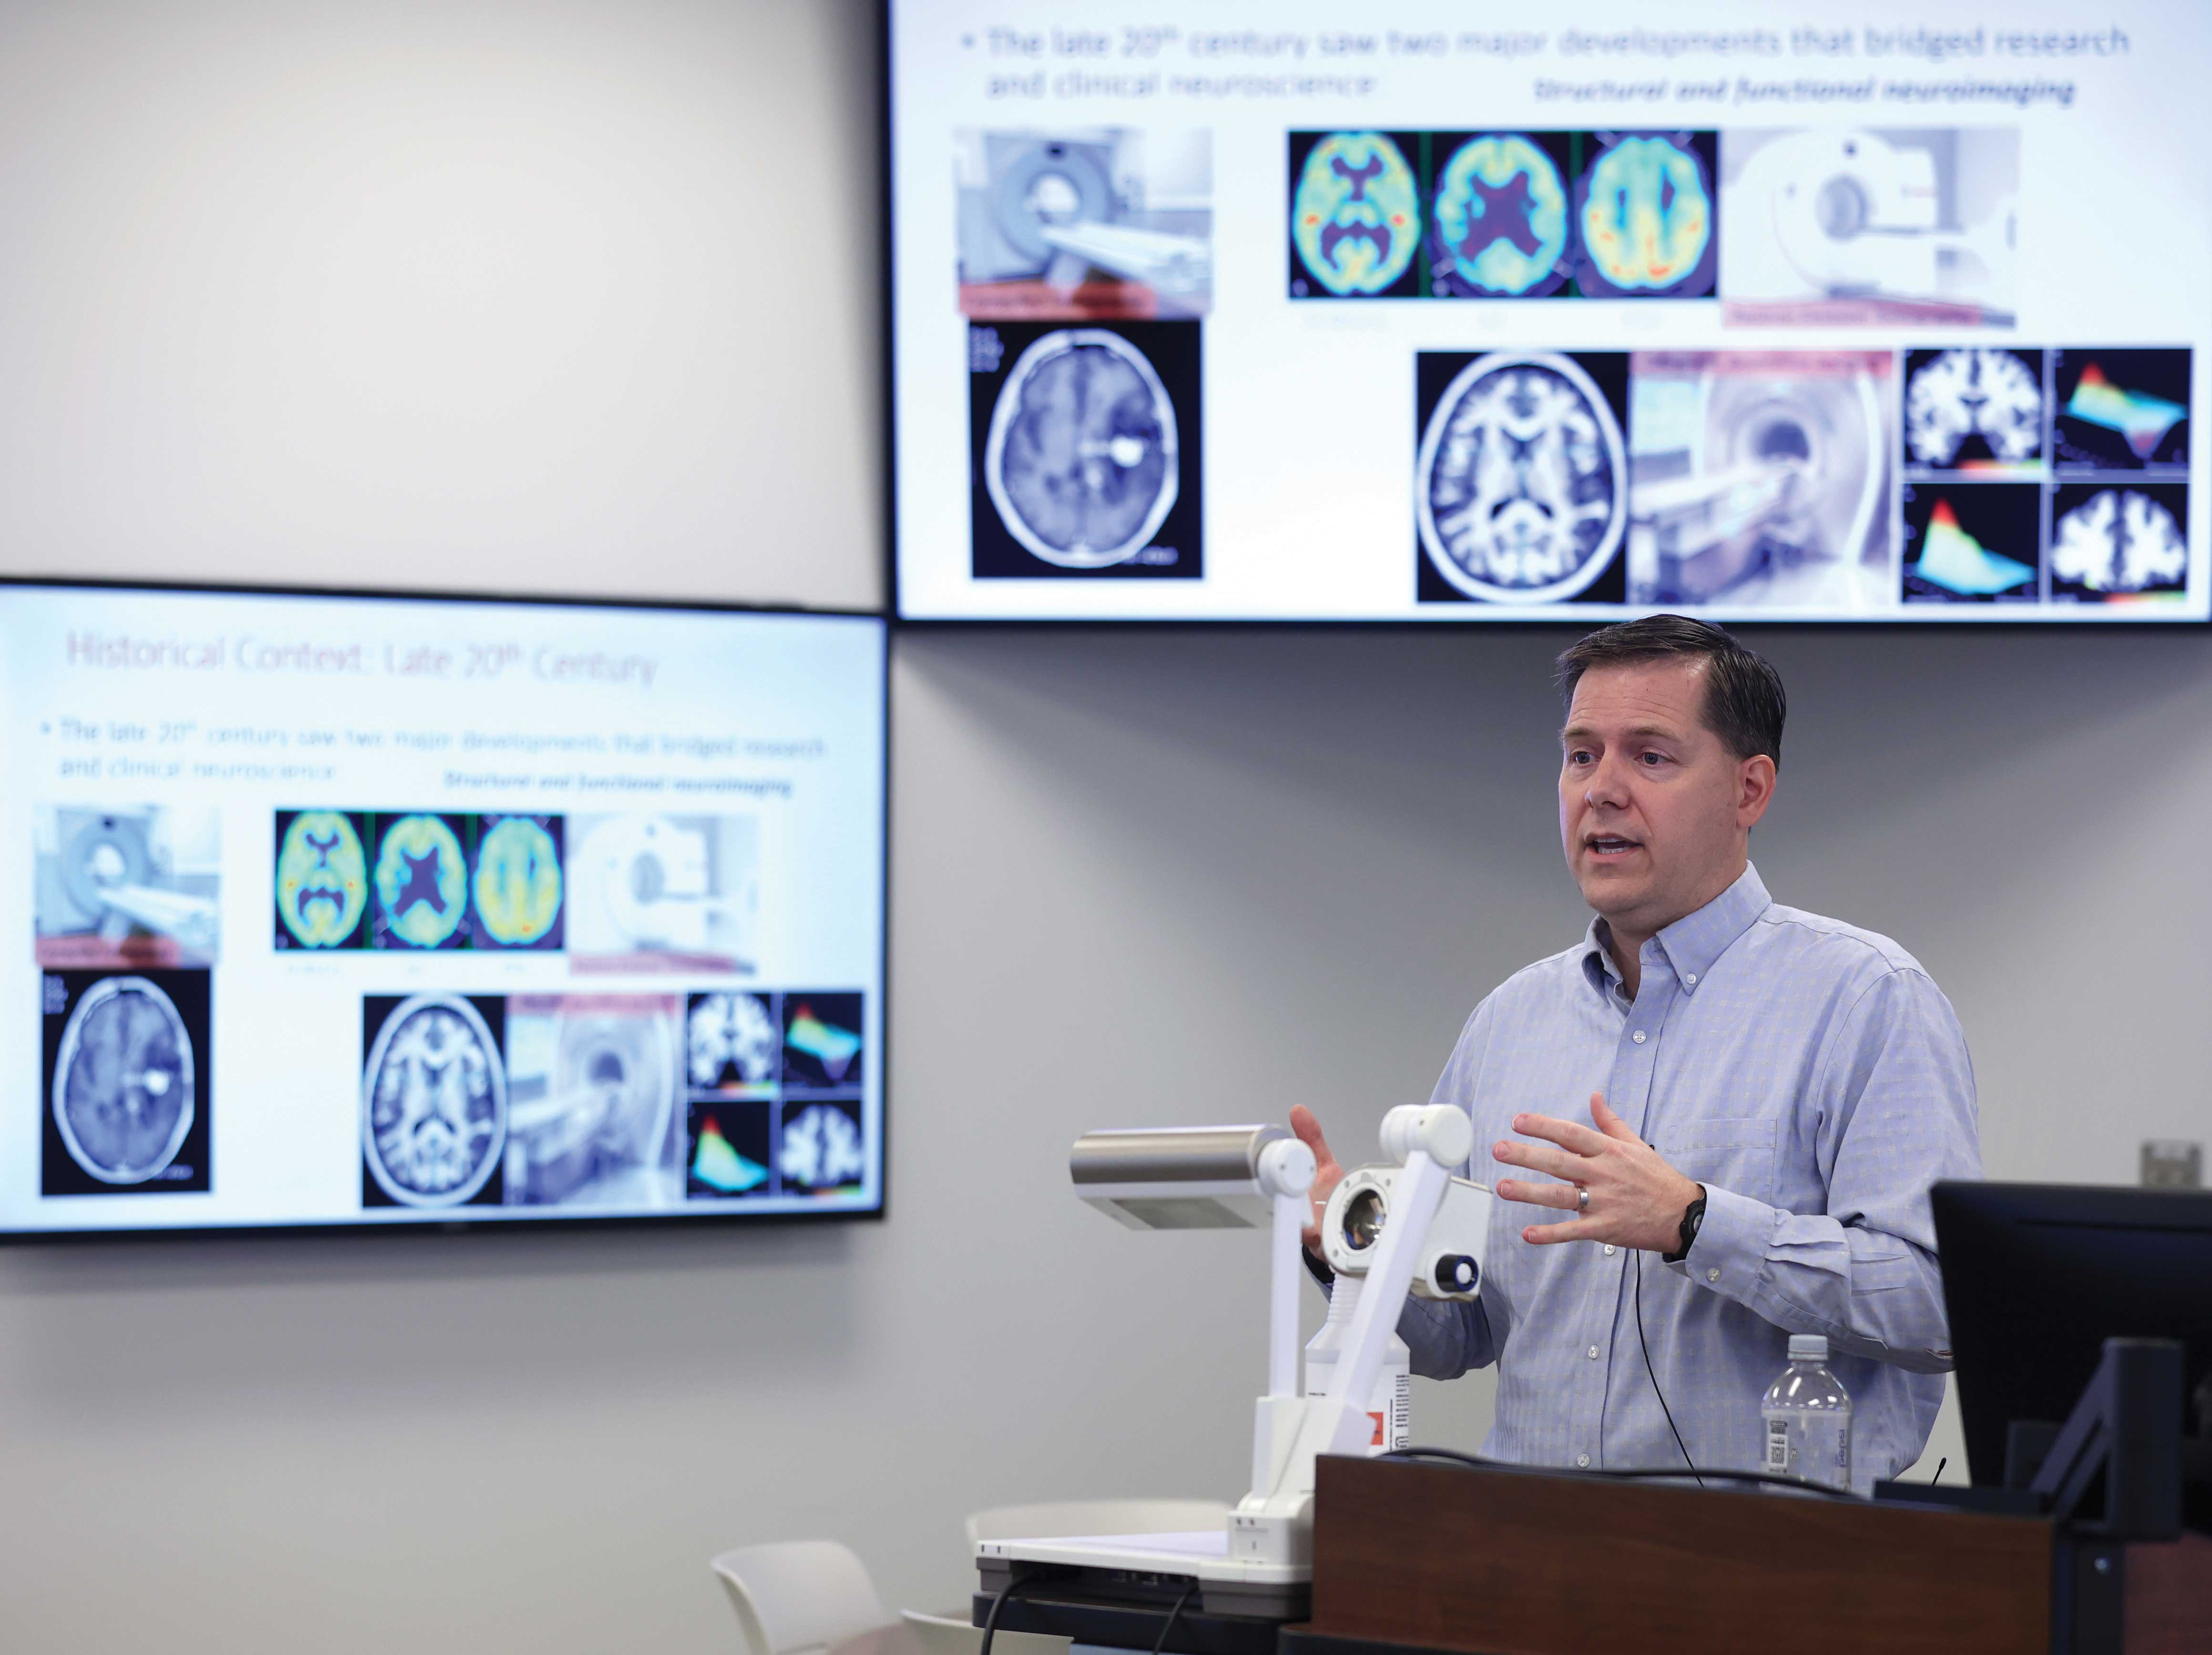 Dr. W. Kyle Simmons, professor of pharmacology and physiology, lectures during his principles of neuroscience course at OSU Center for Health Sciences in Tulsa.